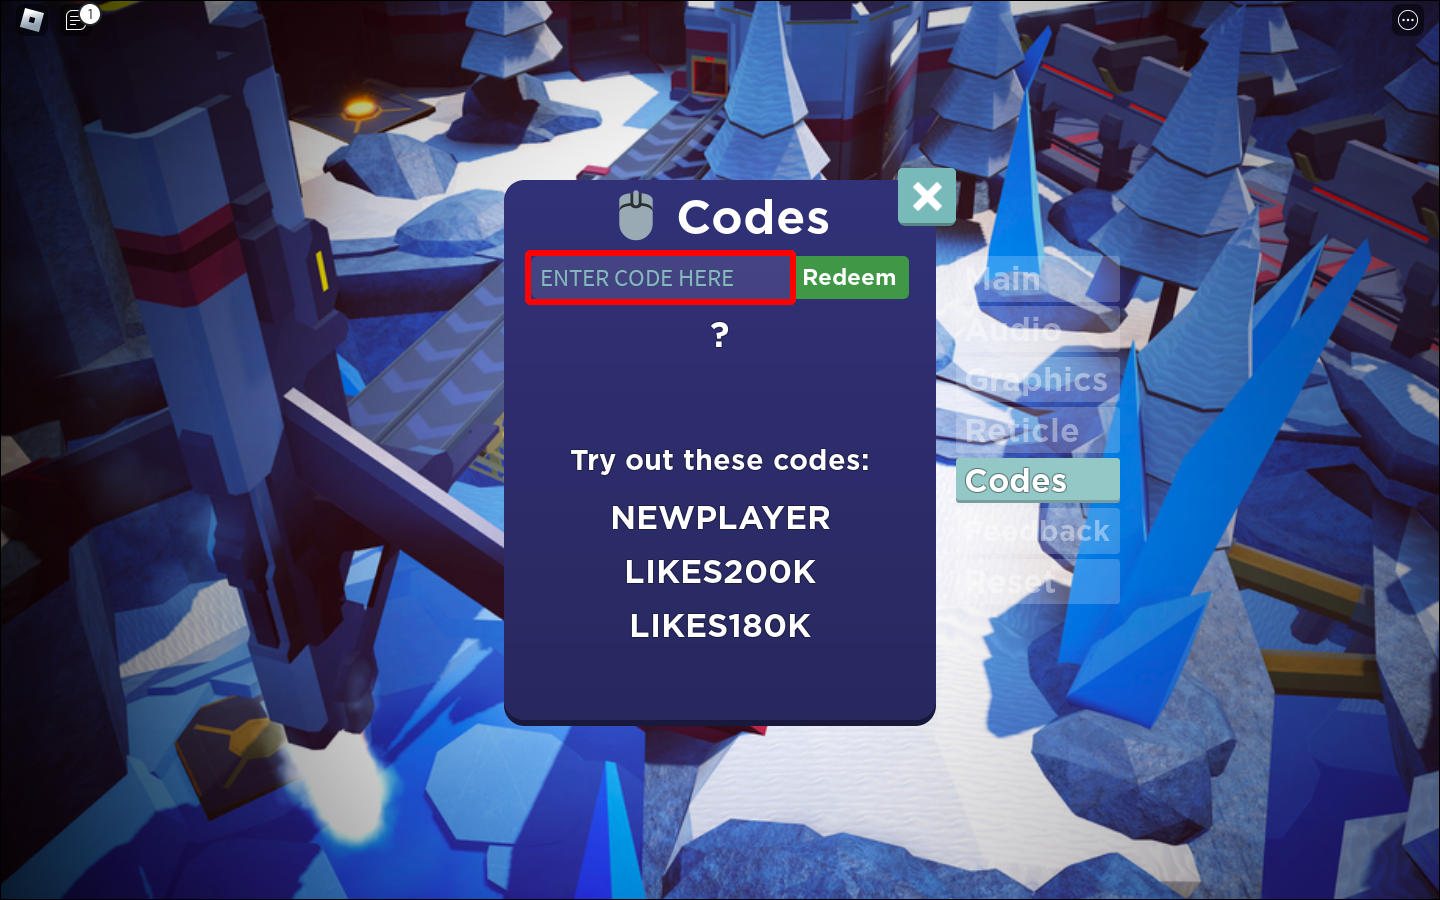 Unlock rewards and dominate the field with Aimblox codes in June